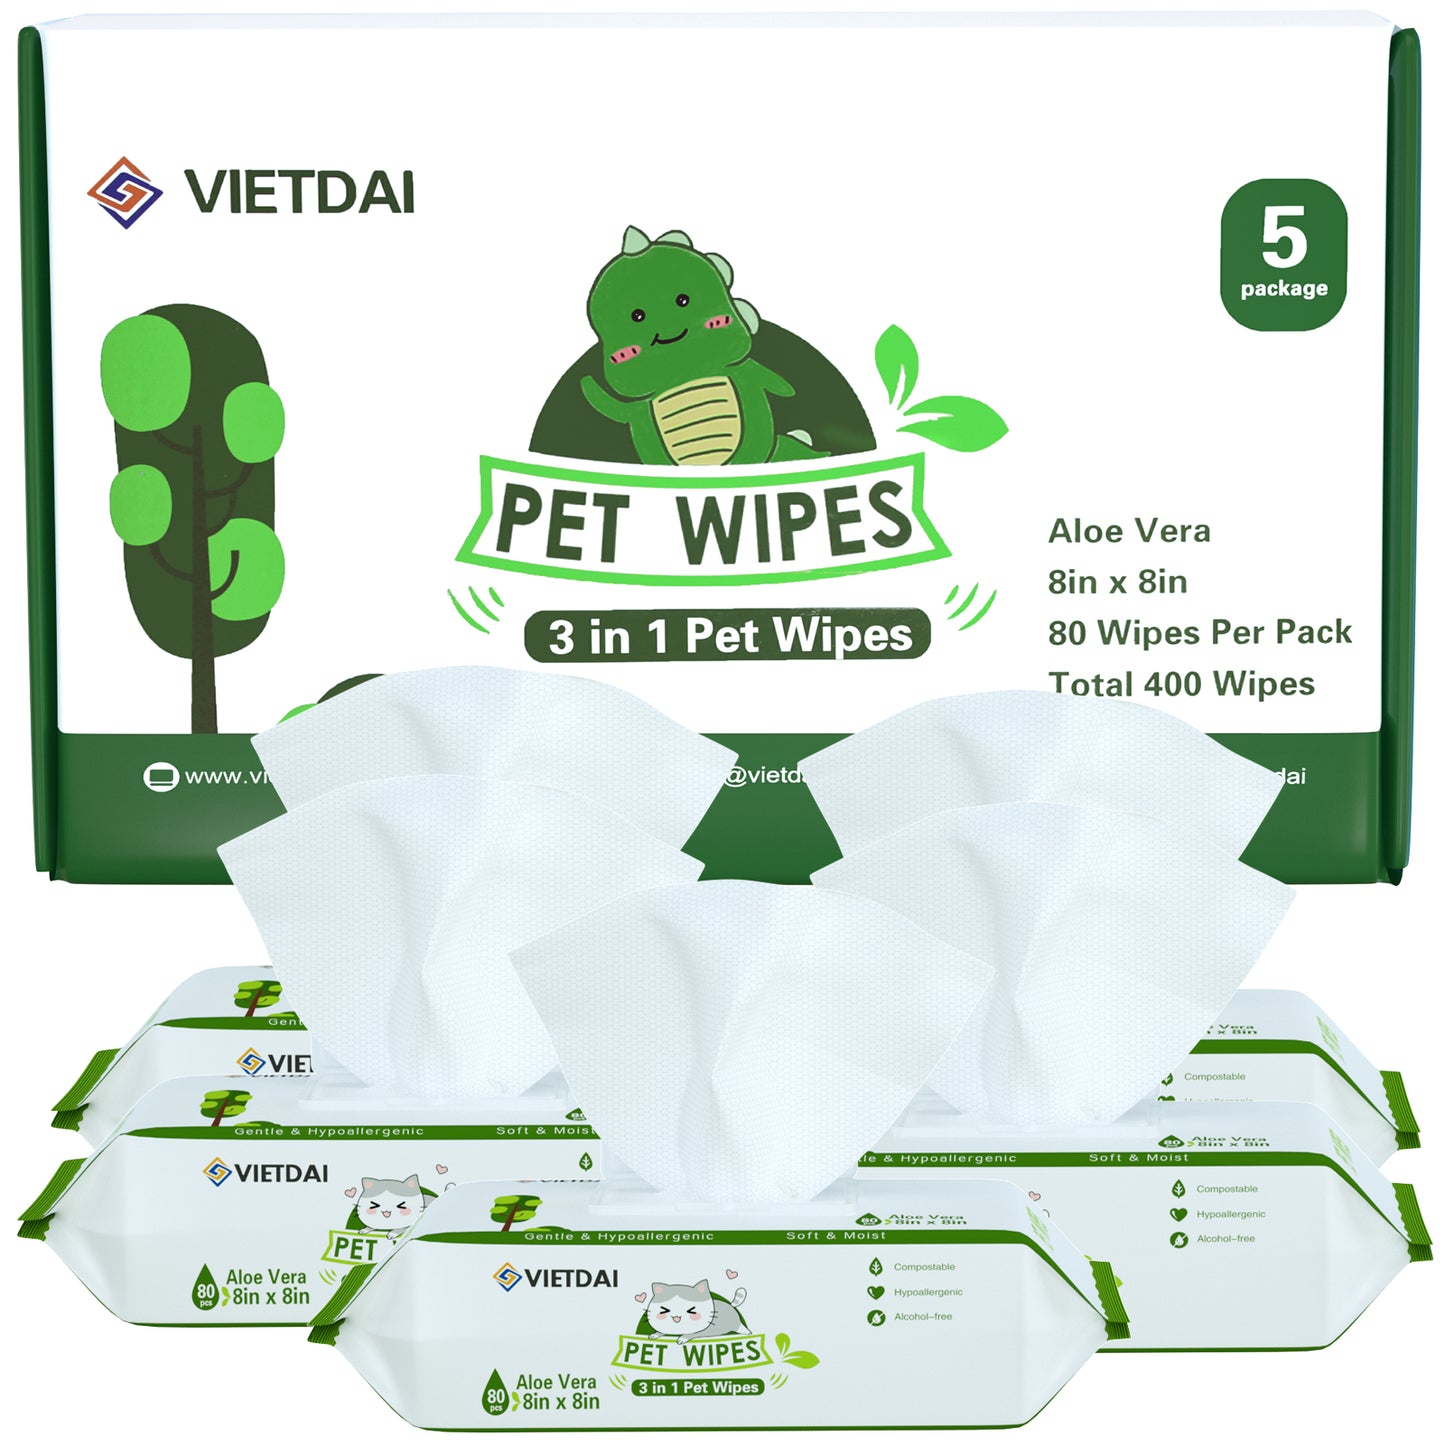 VIETDAI Pet Wipes - 5 Pack (400 tablets)